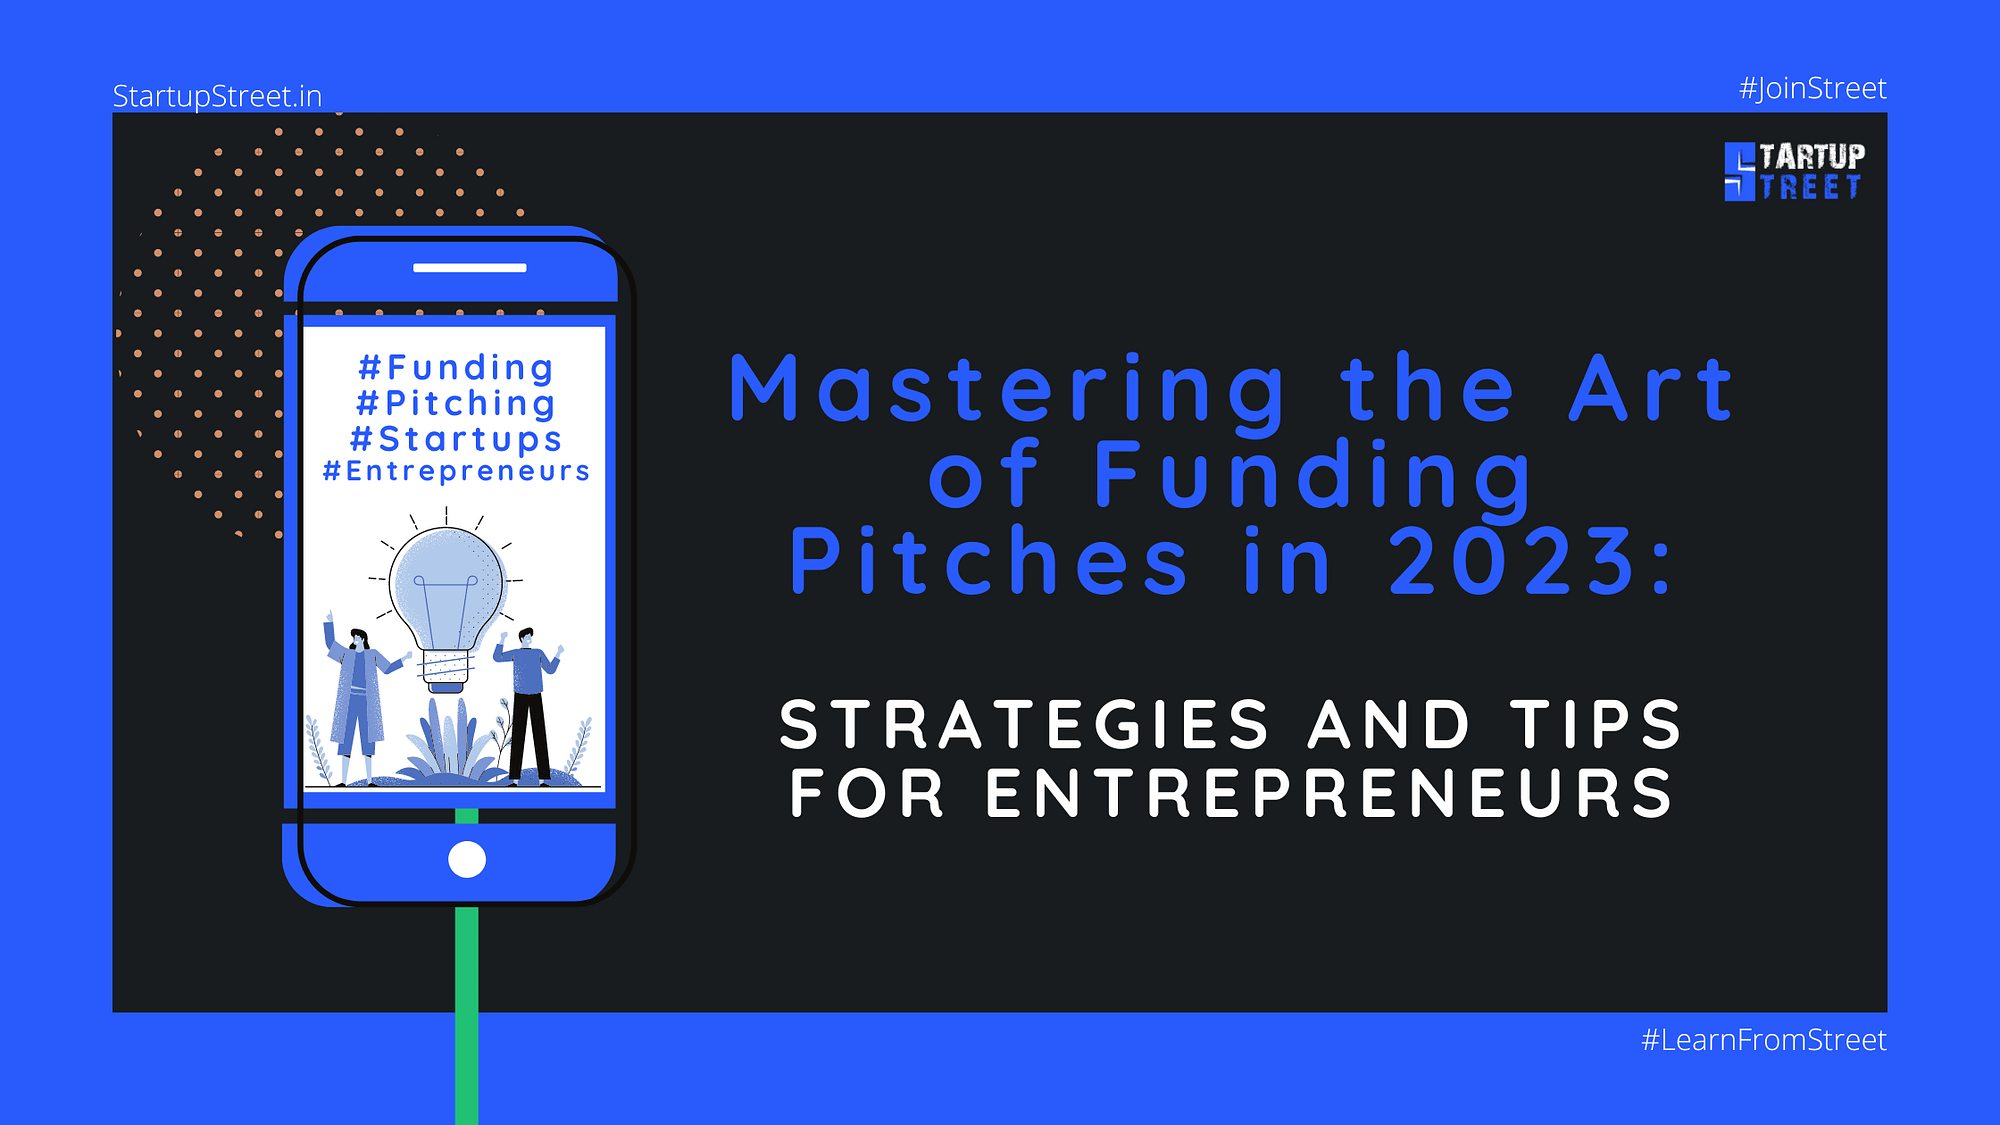 Mastering the Art of Funding Pitches in 2023 - Strategies and Tips for Entrepreneurs_StartupStreet.in